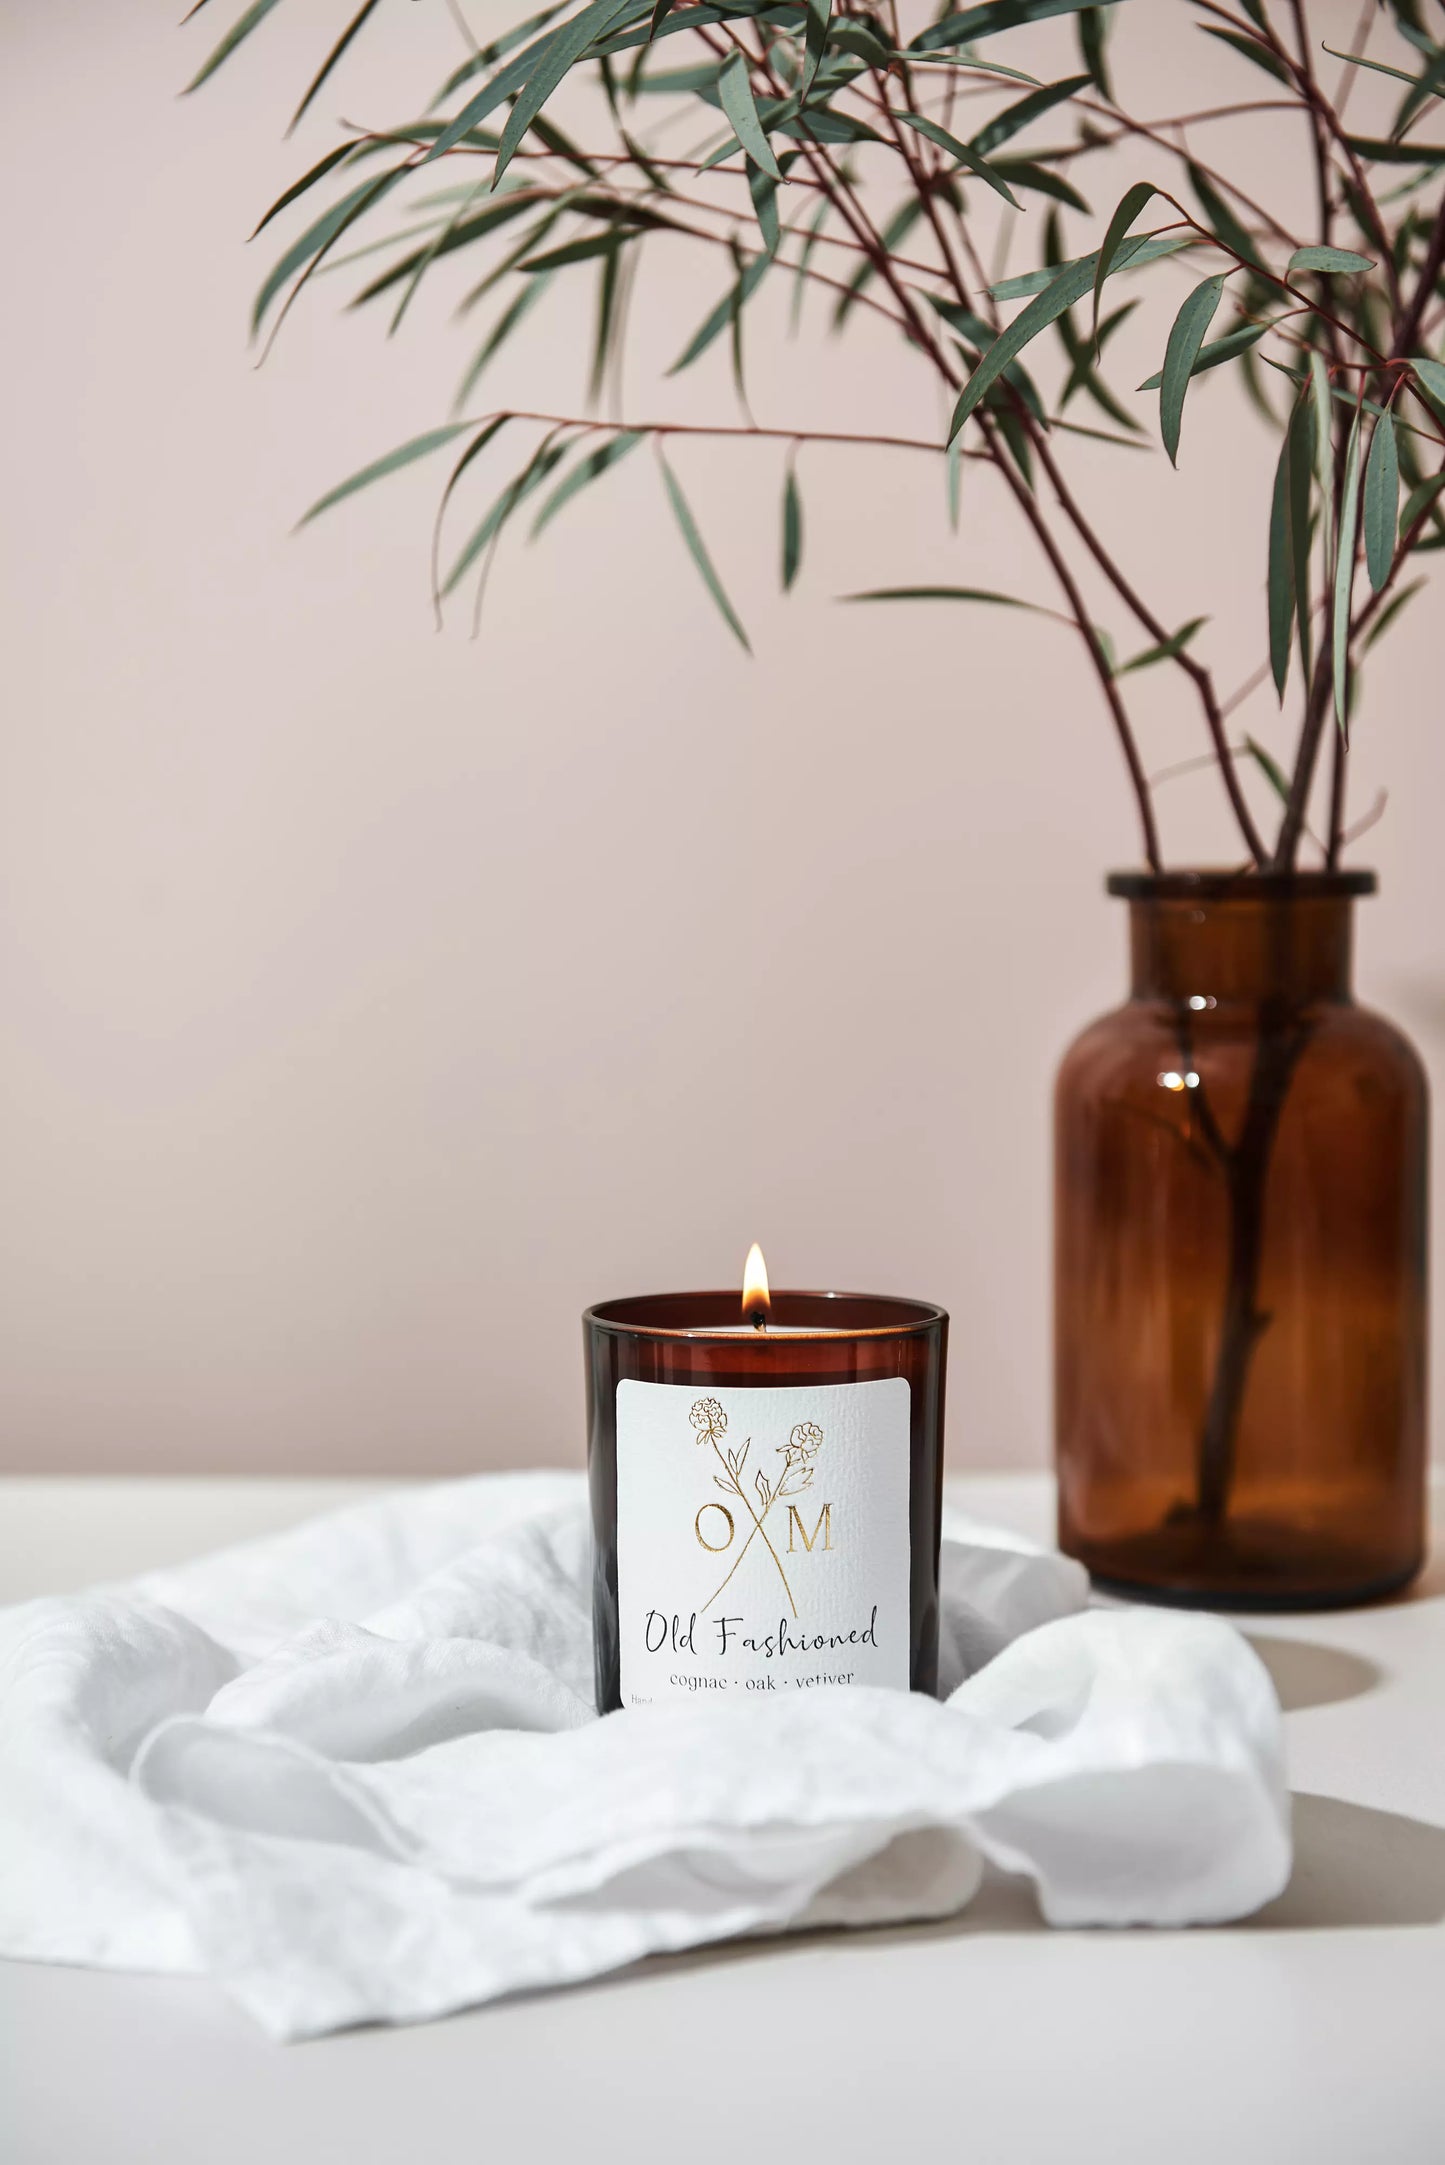 Our cognac and oak scented candle is lit and on display in an amber glass jar.